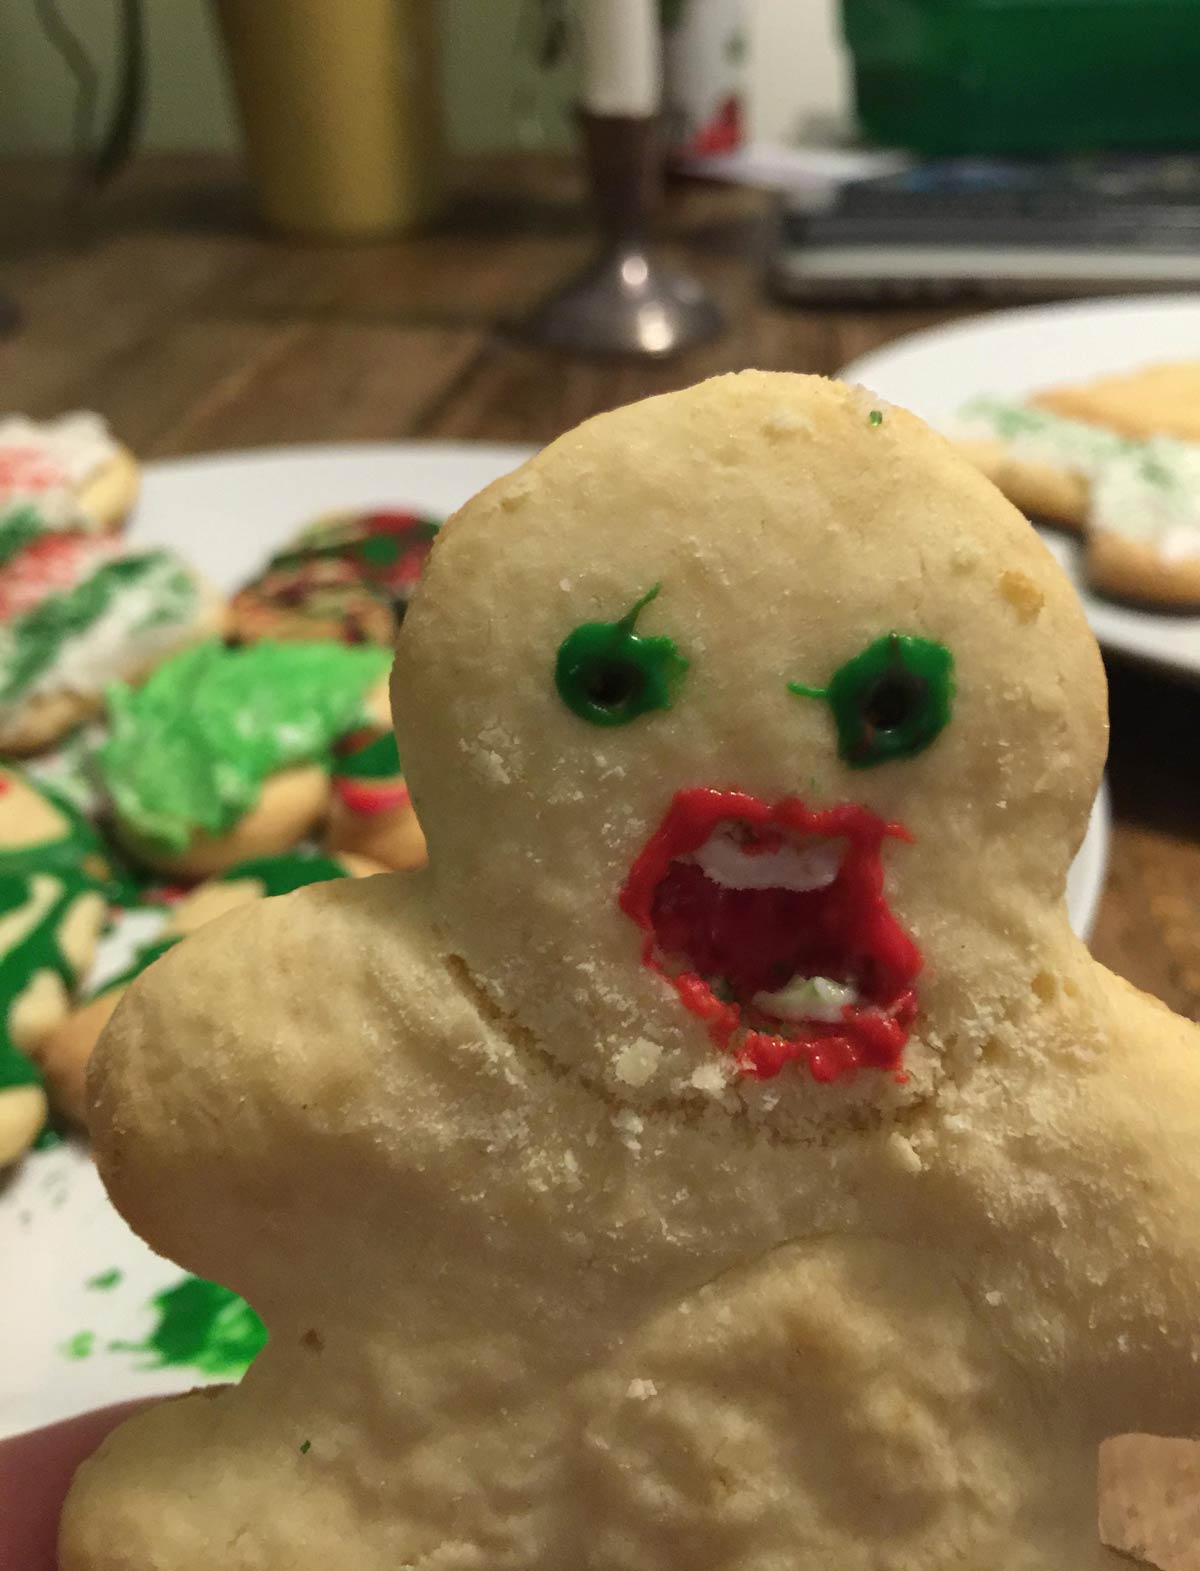 I made a terrifying Christmas cookie